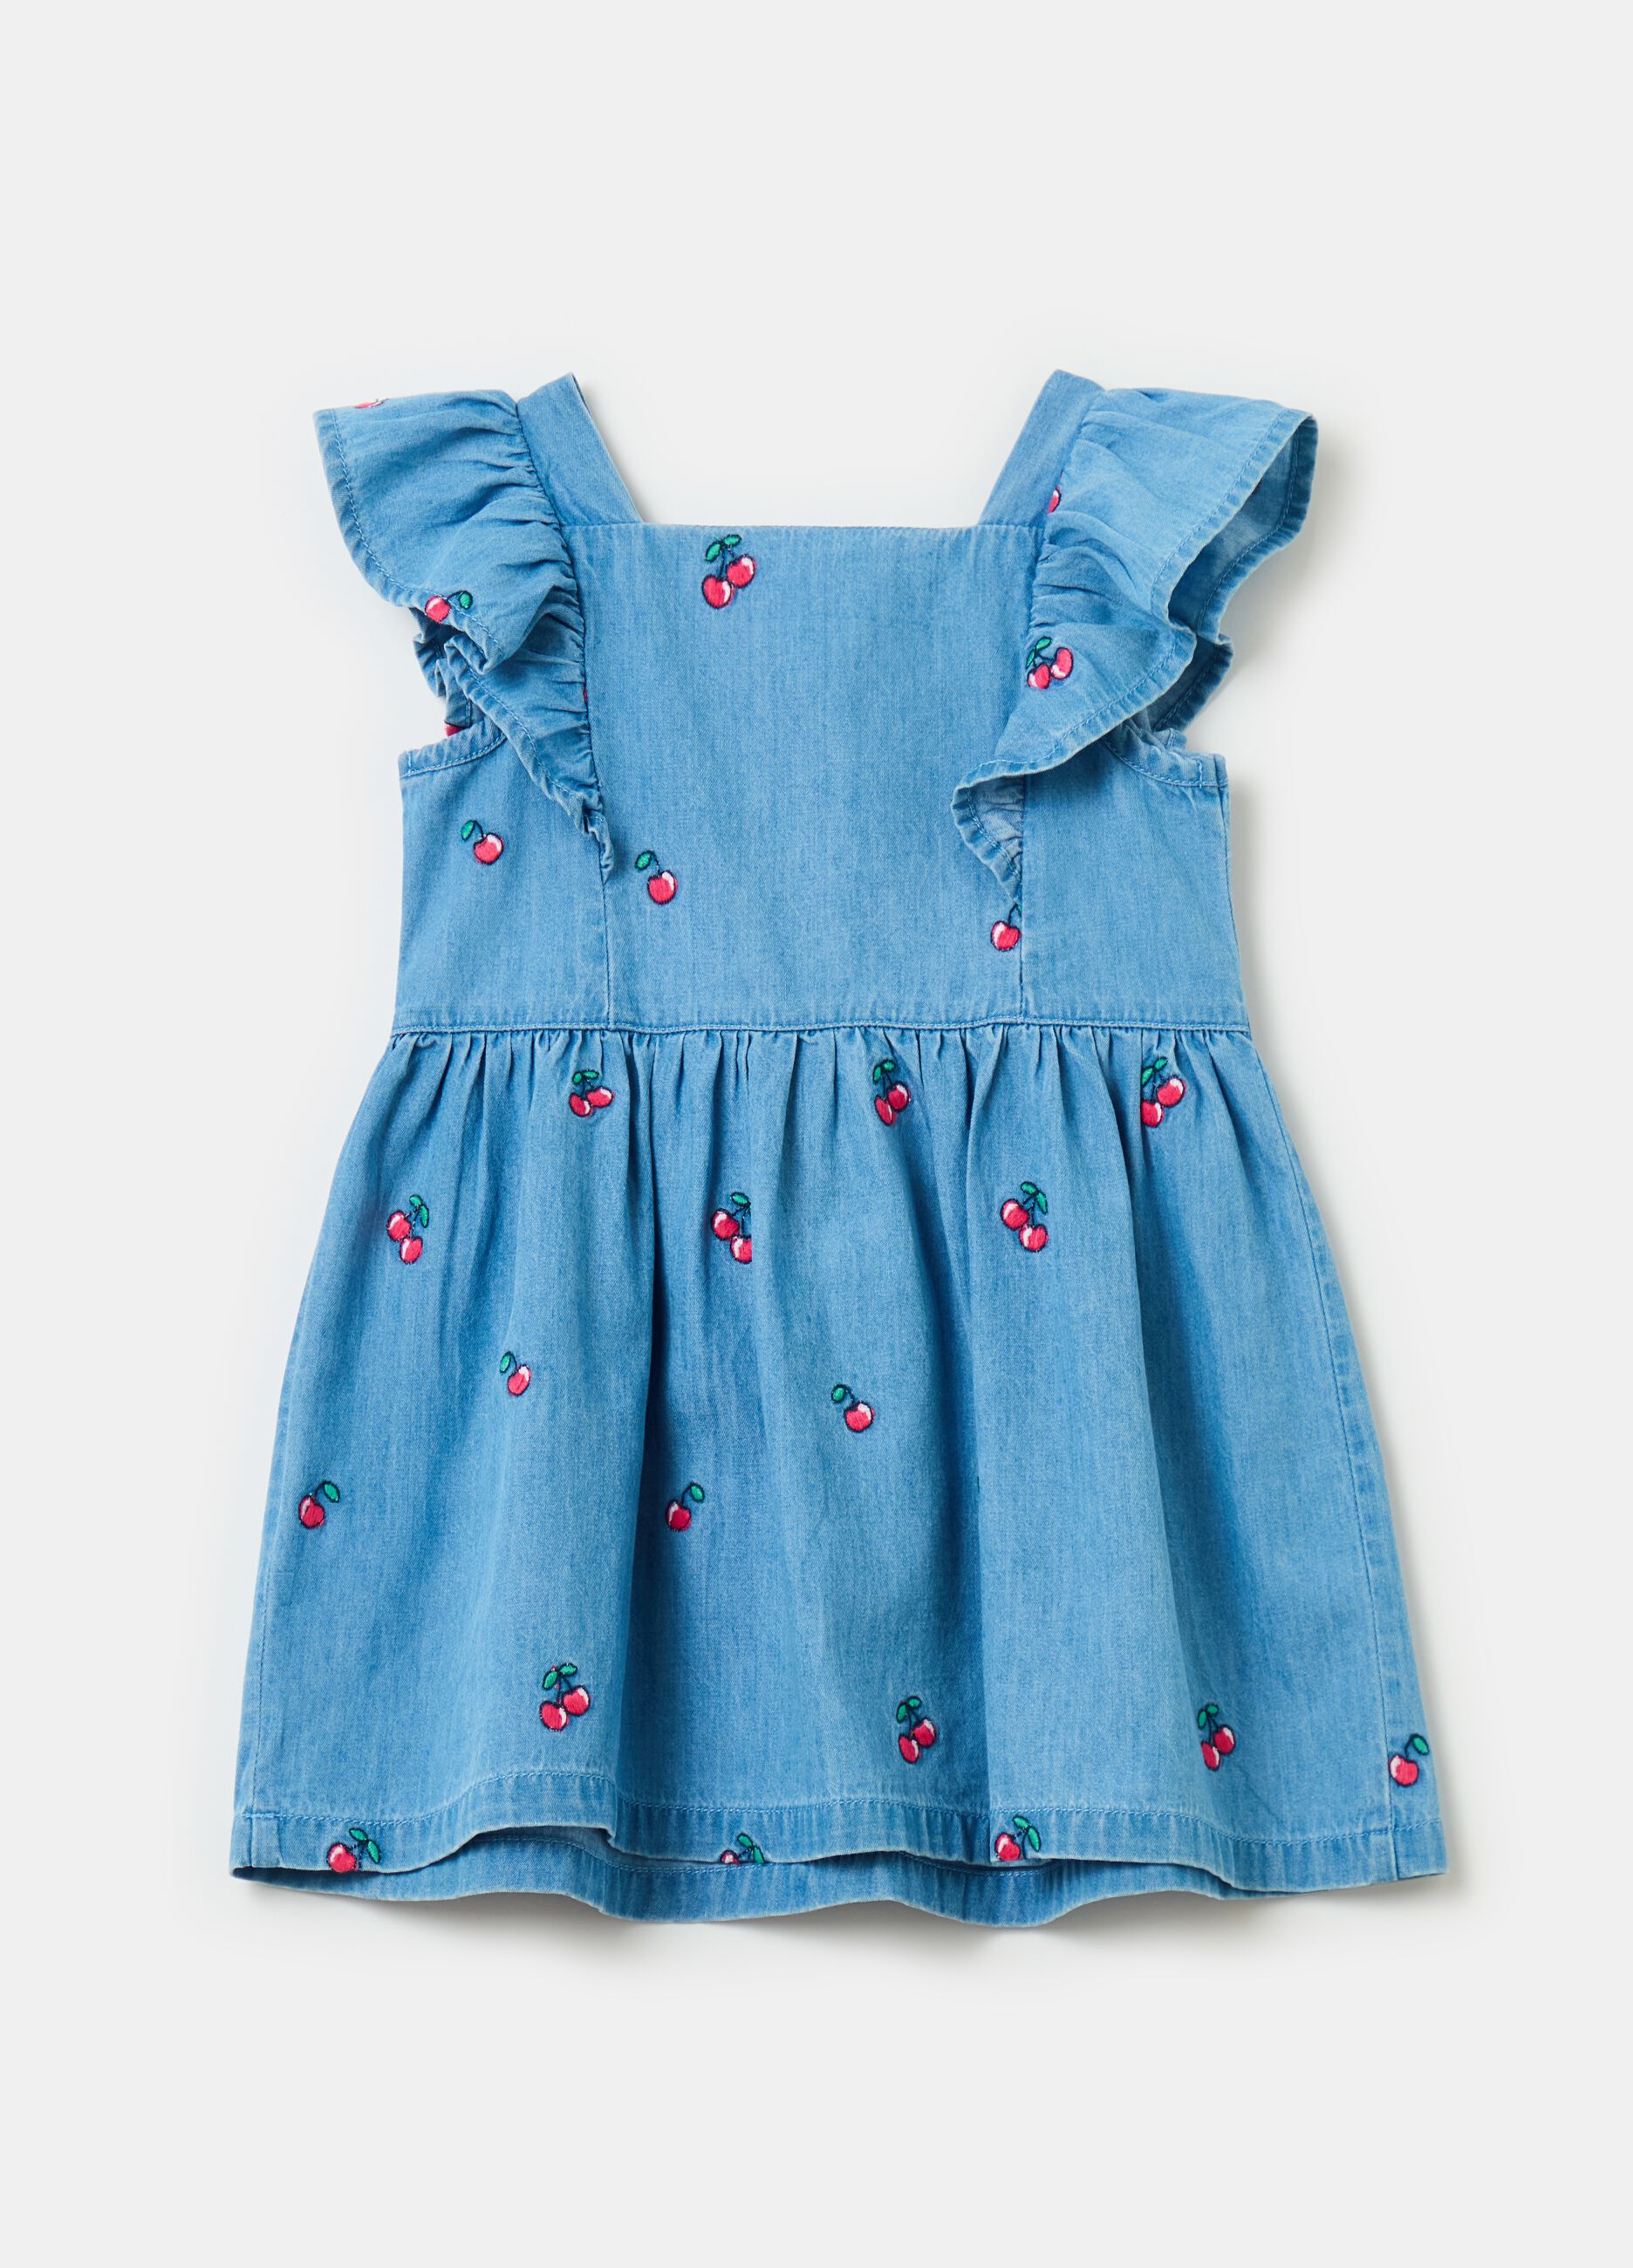 Denim chambray dress with cherries embroidery